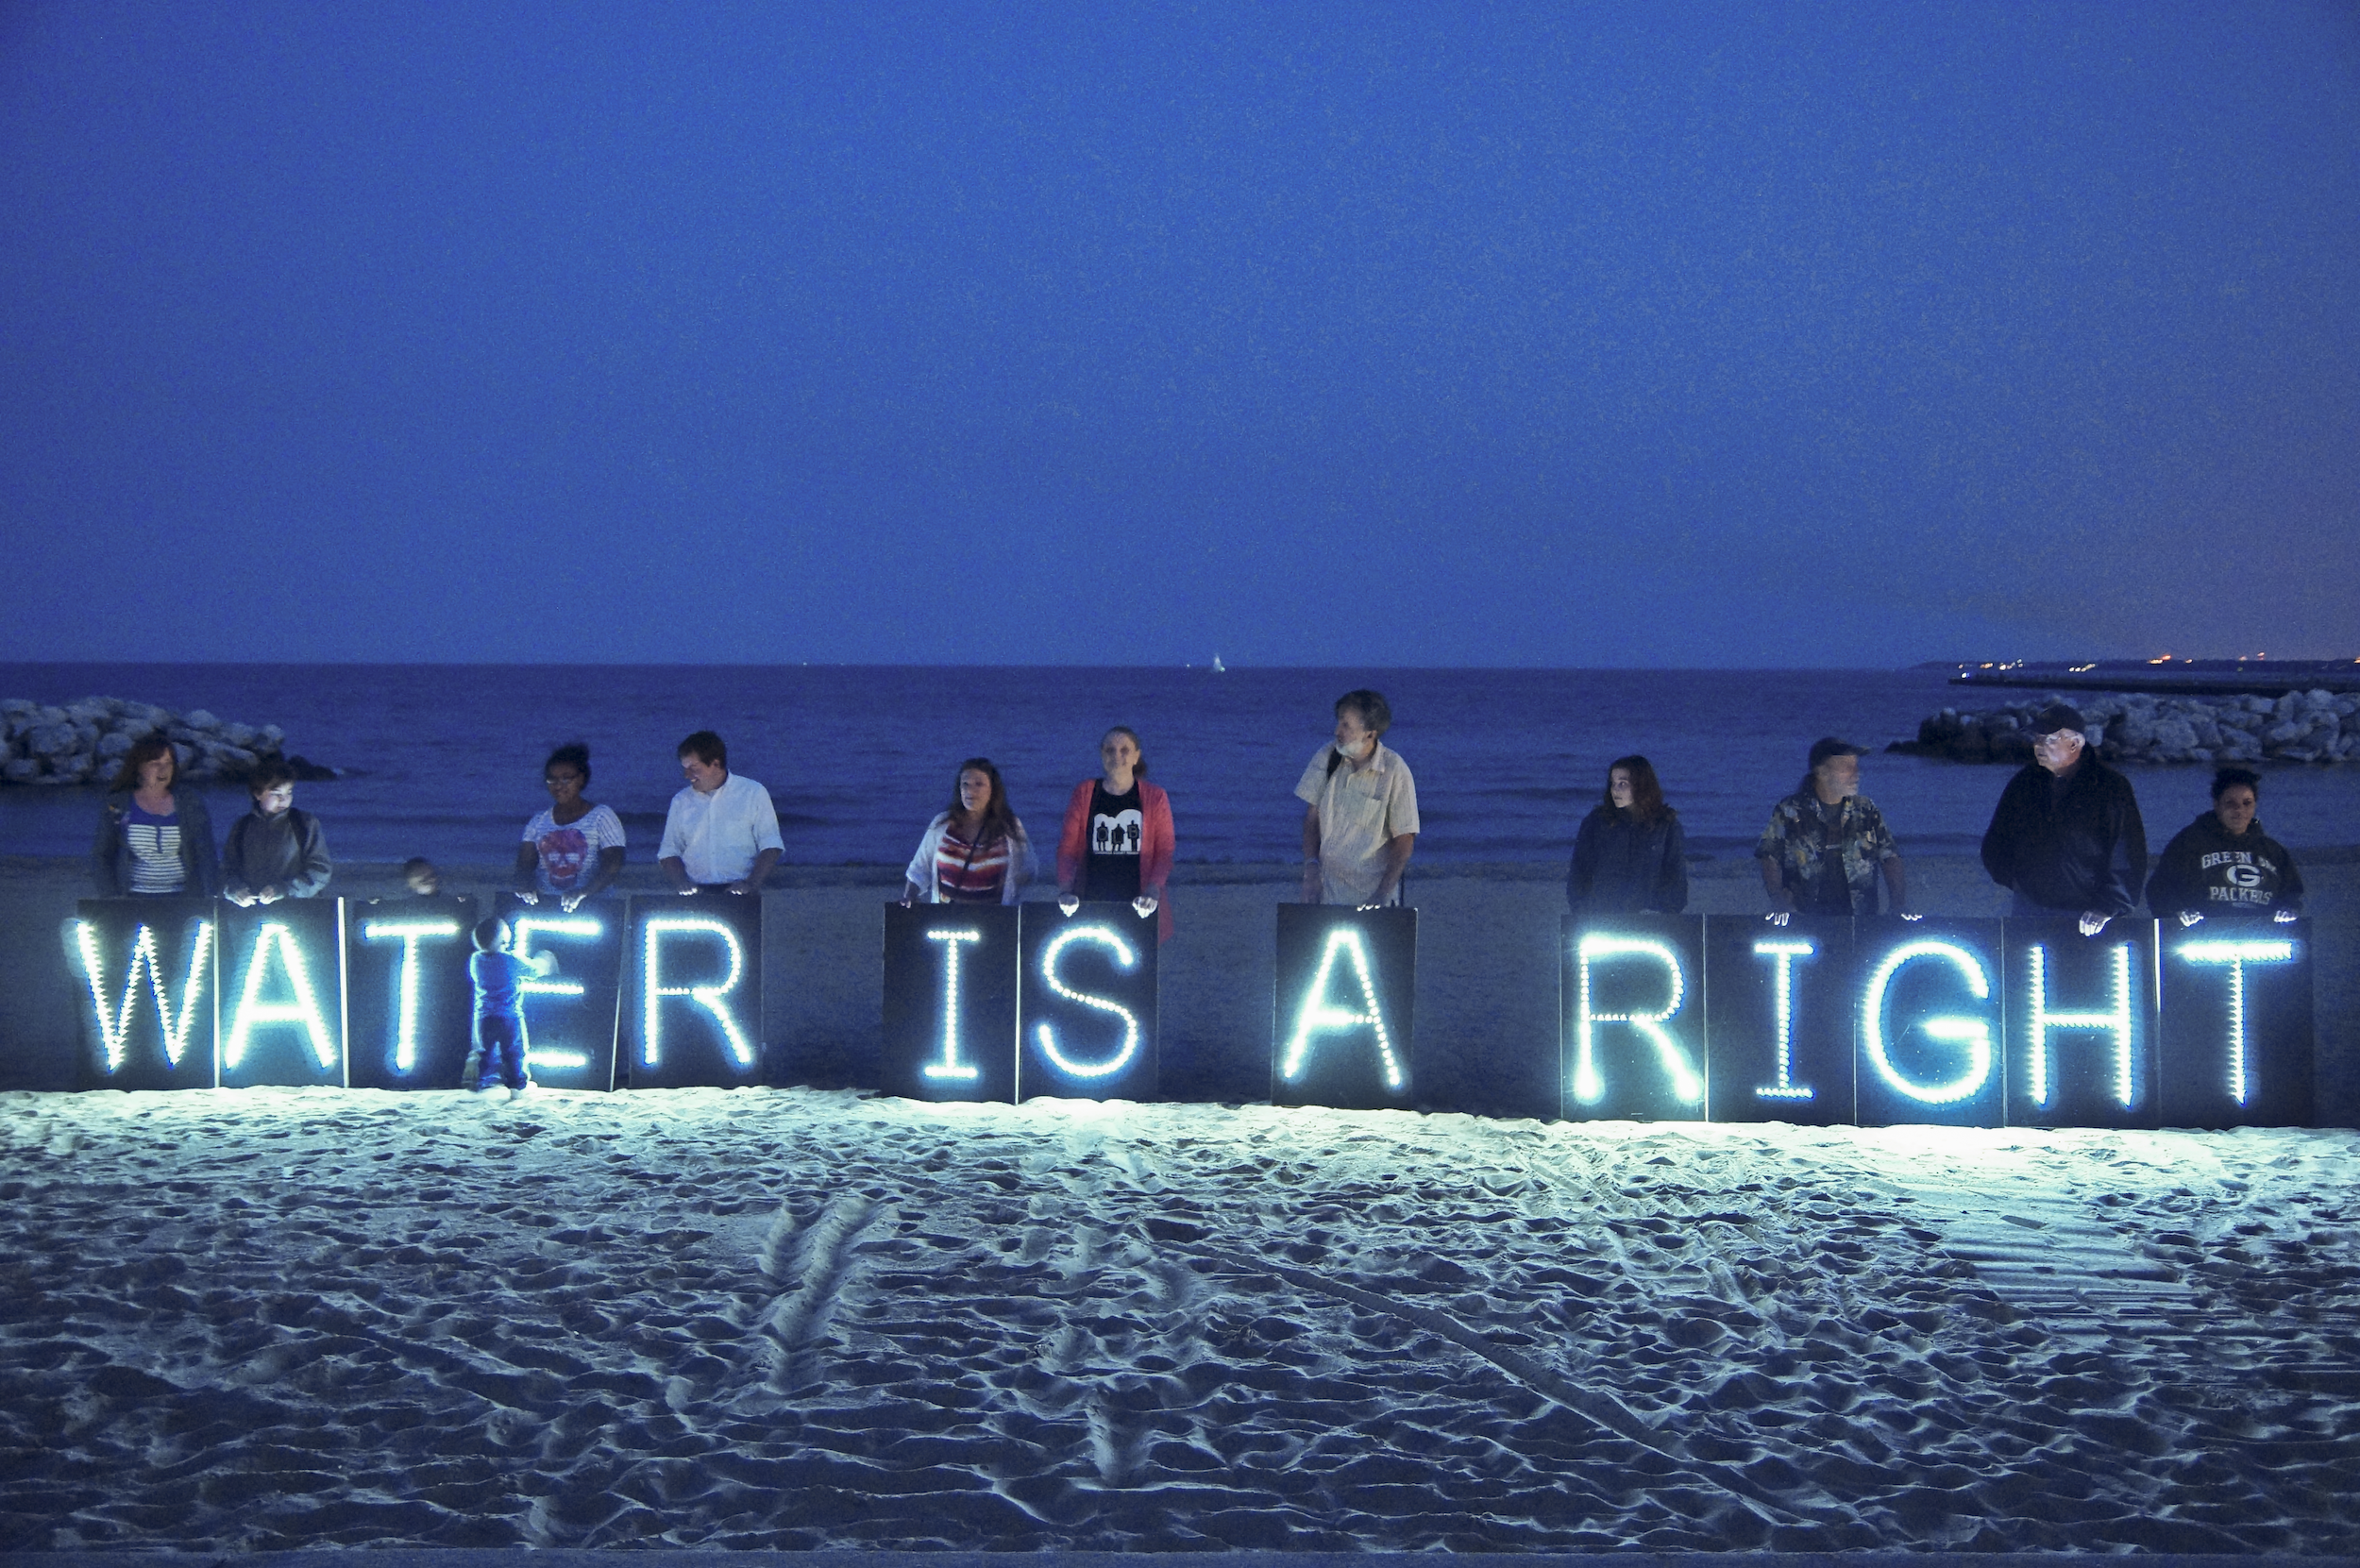 A small group of people standing in front of the ocean in moonlight holding up lit up signs that read "water is a right"